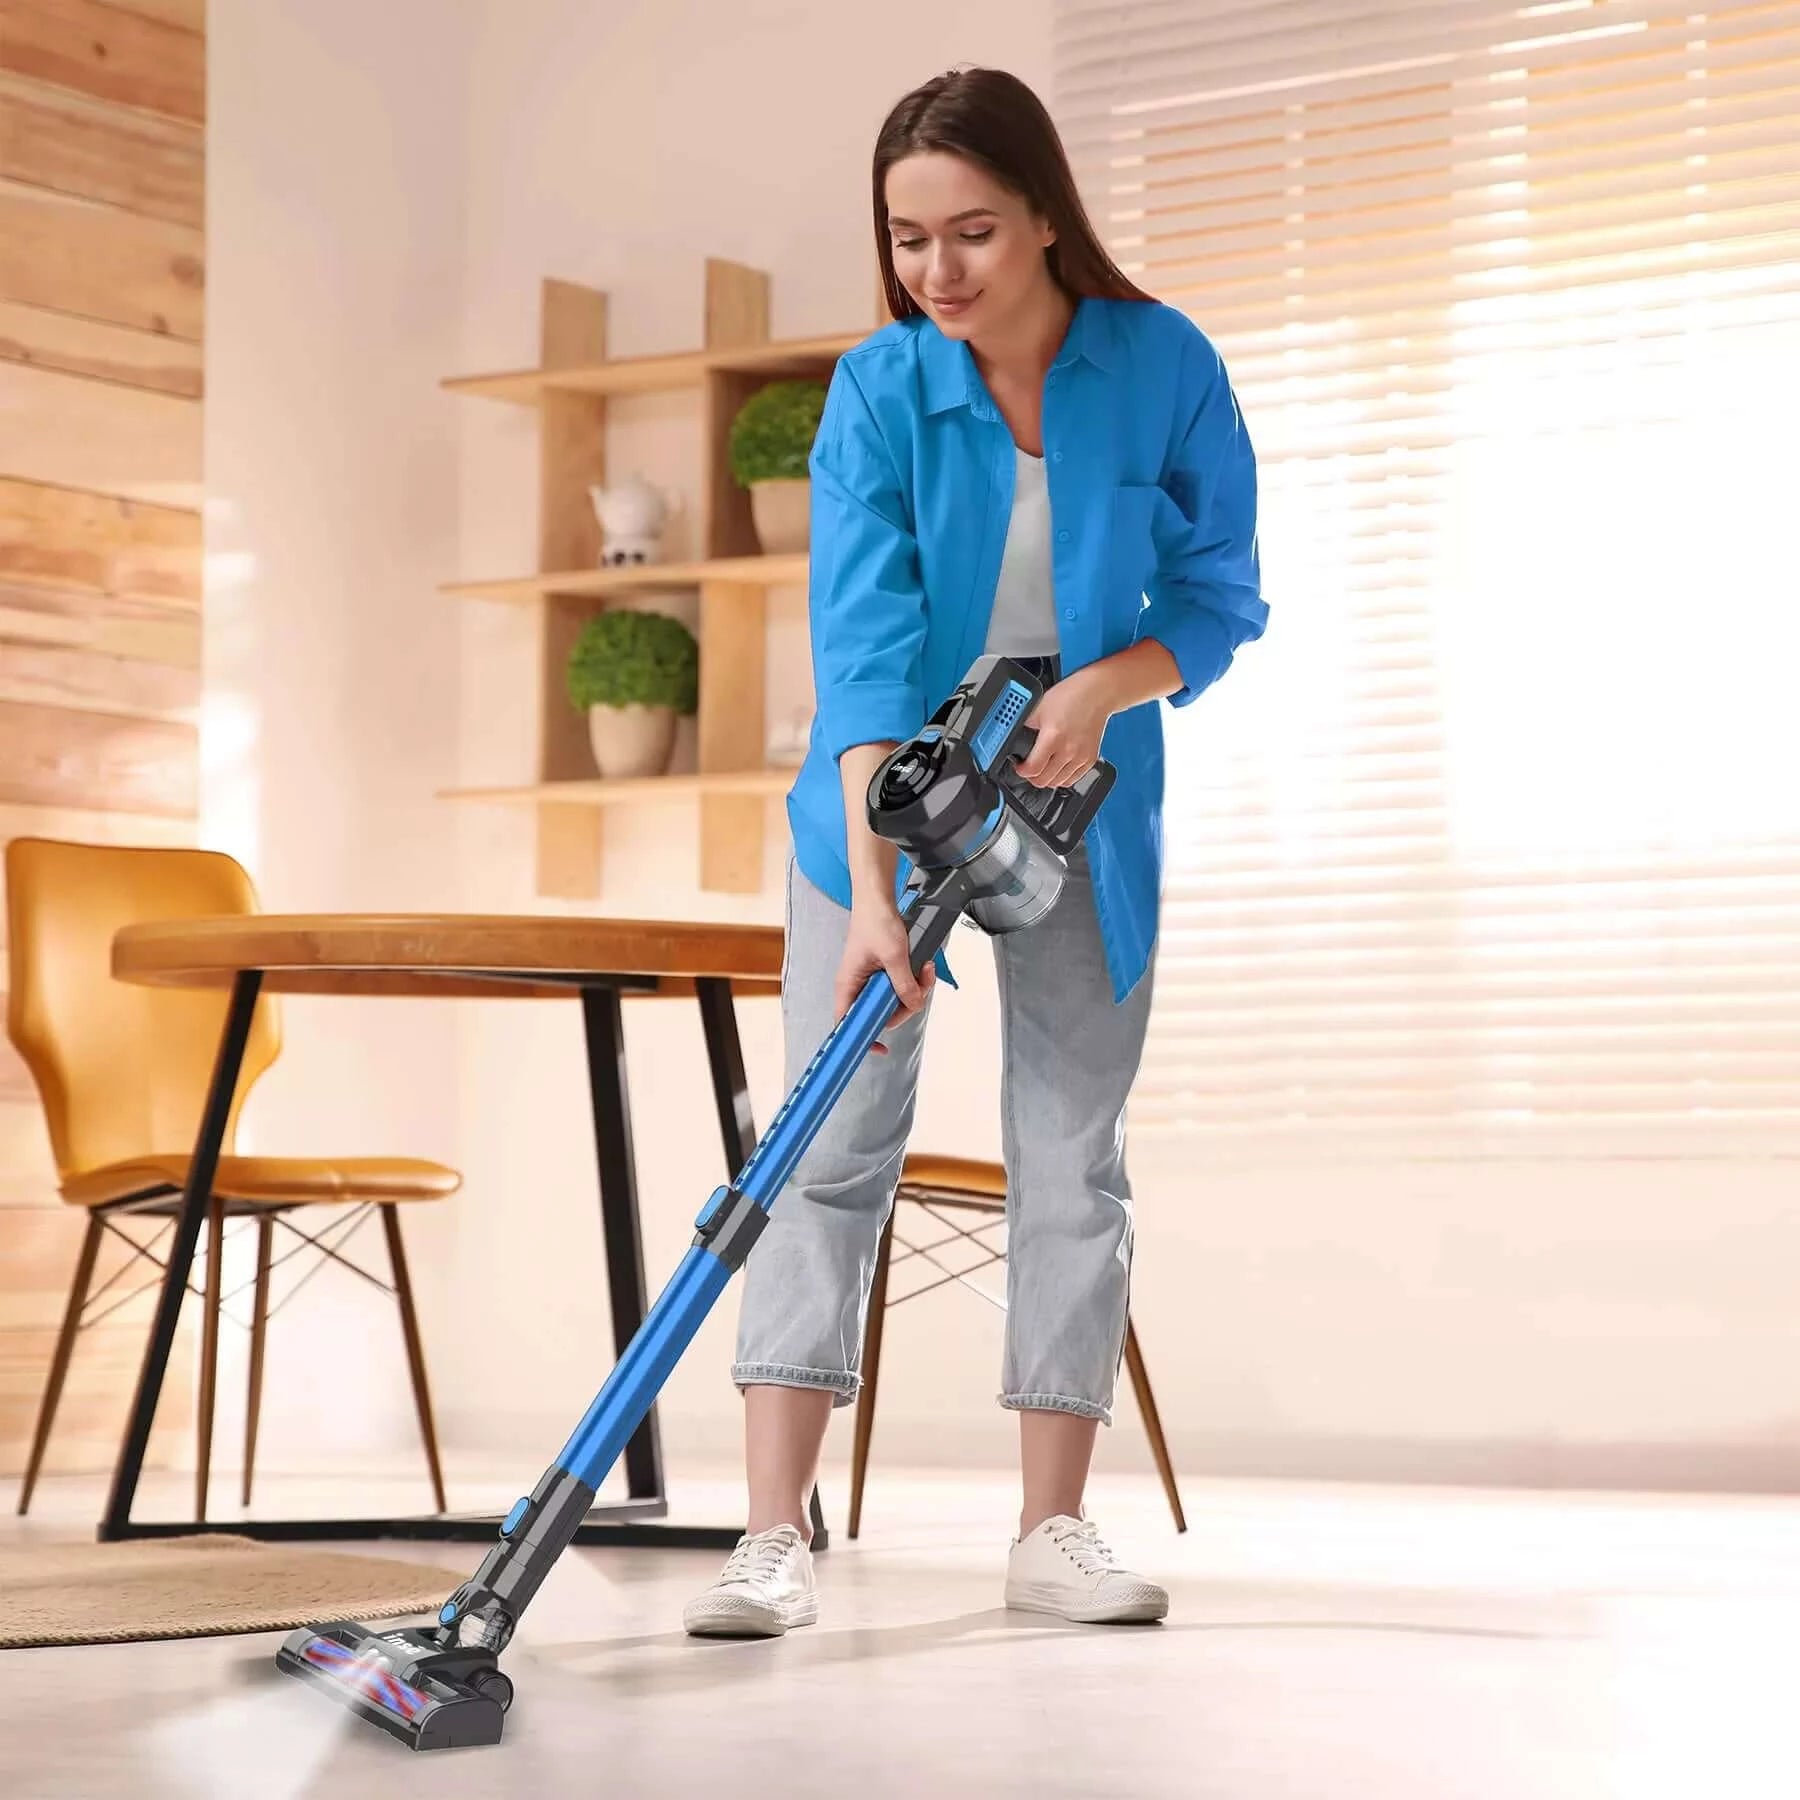 INSE N6S Rechargeable Stick Vacuum for home-inselife.com